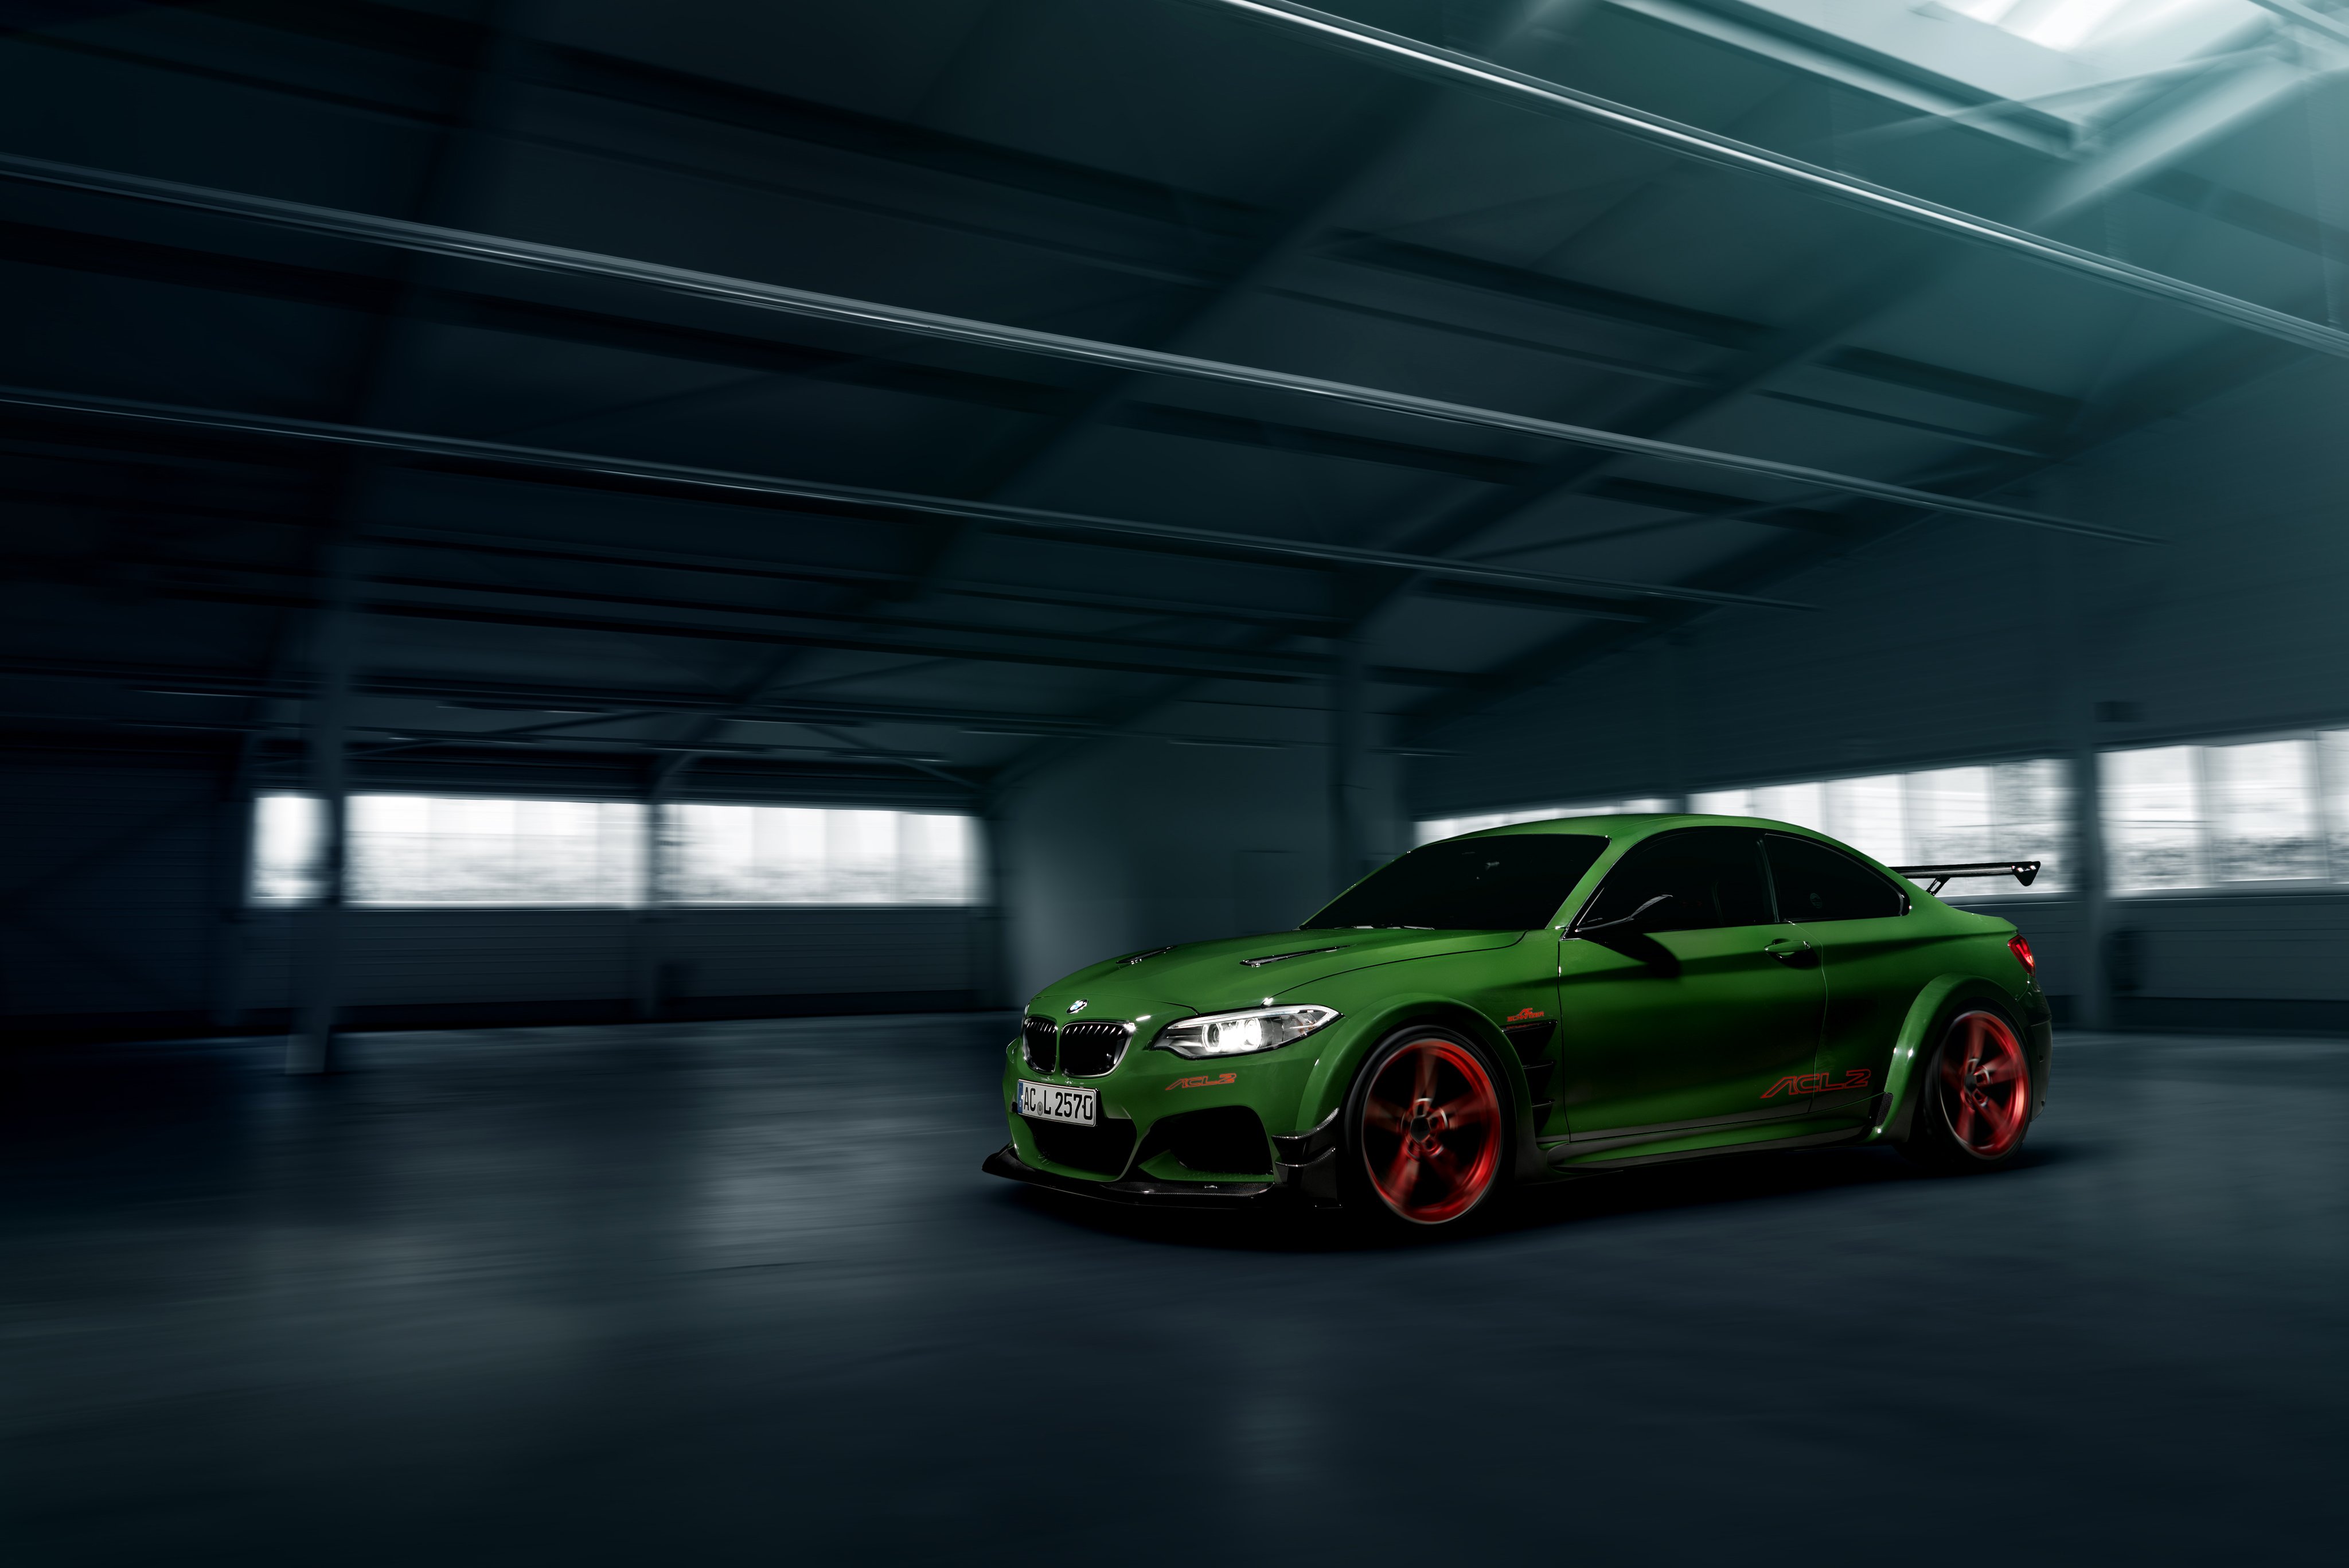 ac, Schnitzer, Bmw, Acl2,  f22 , Cars, Coupe, Green, Modified, 2015 Wallpaper